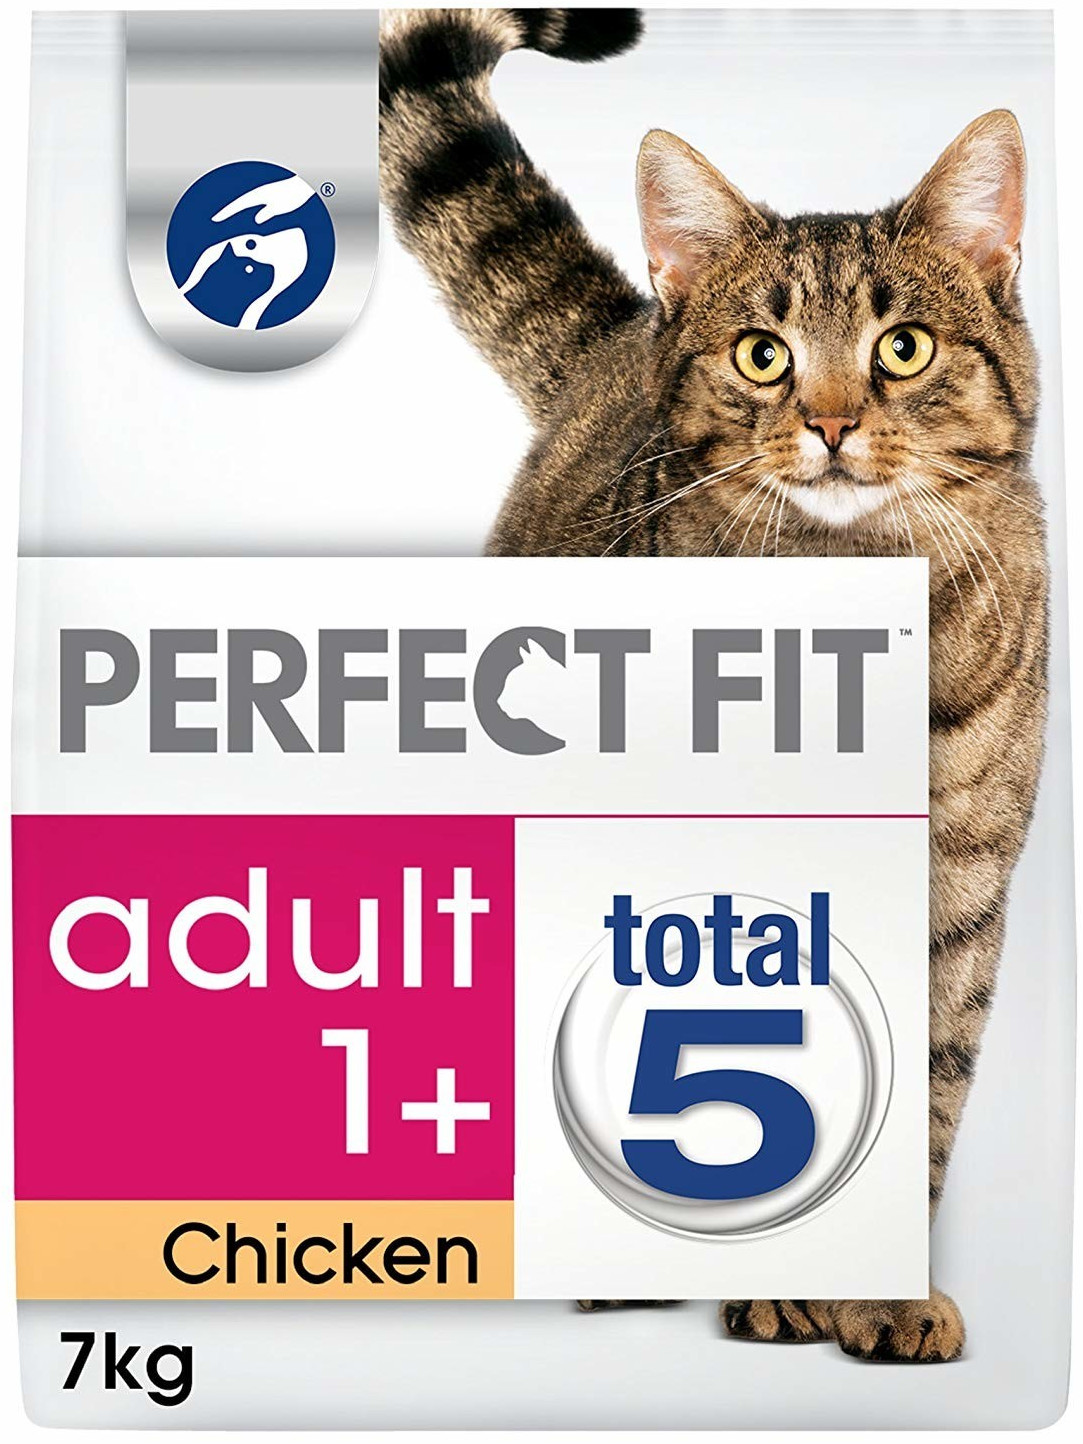 Buy Perfect Fit Cat Adult 1+ Dry Food Chicken 7kg from £24.00 (Today